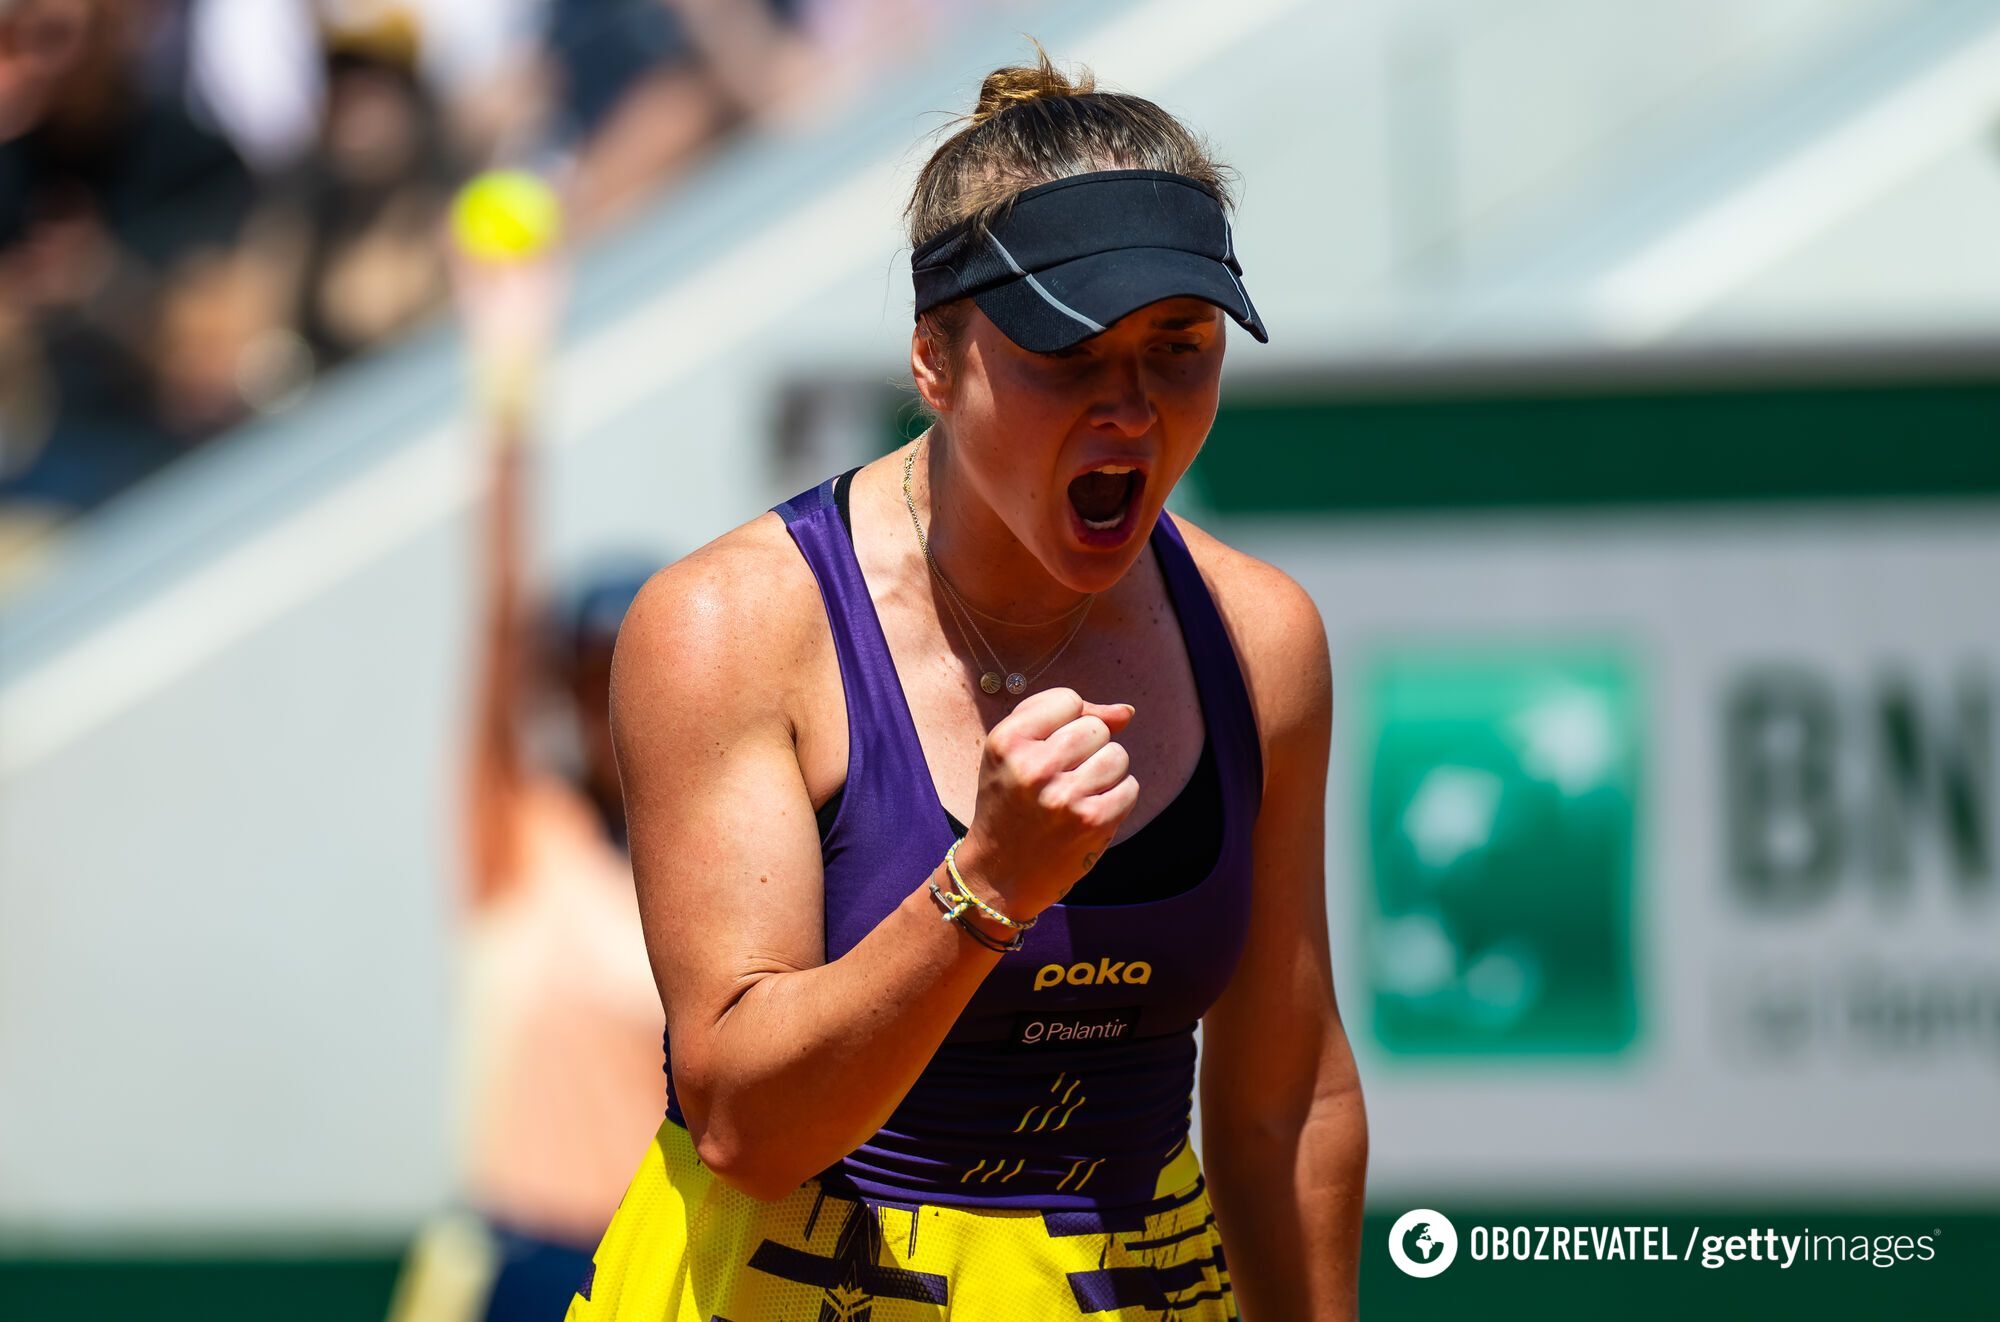 Svitolina in yellow and blue turned the match around at Roland Garros and won a bright victory